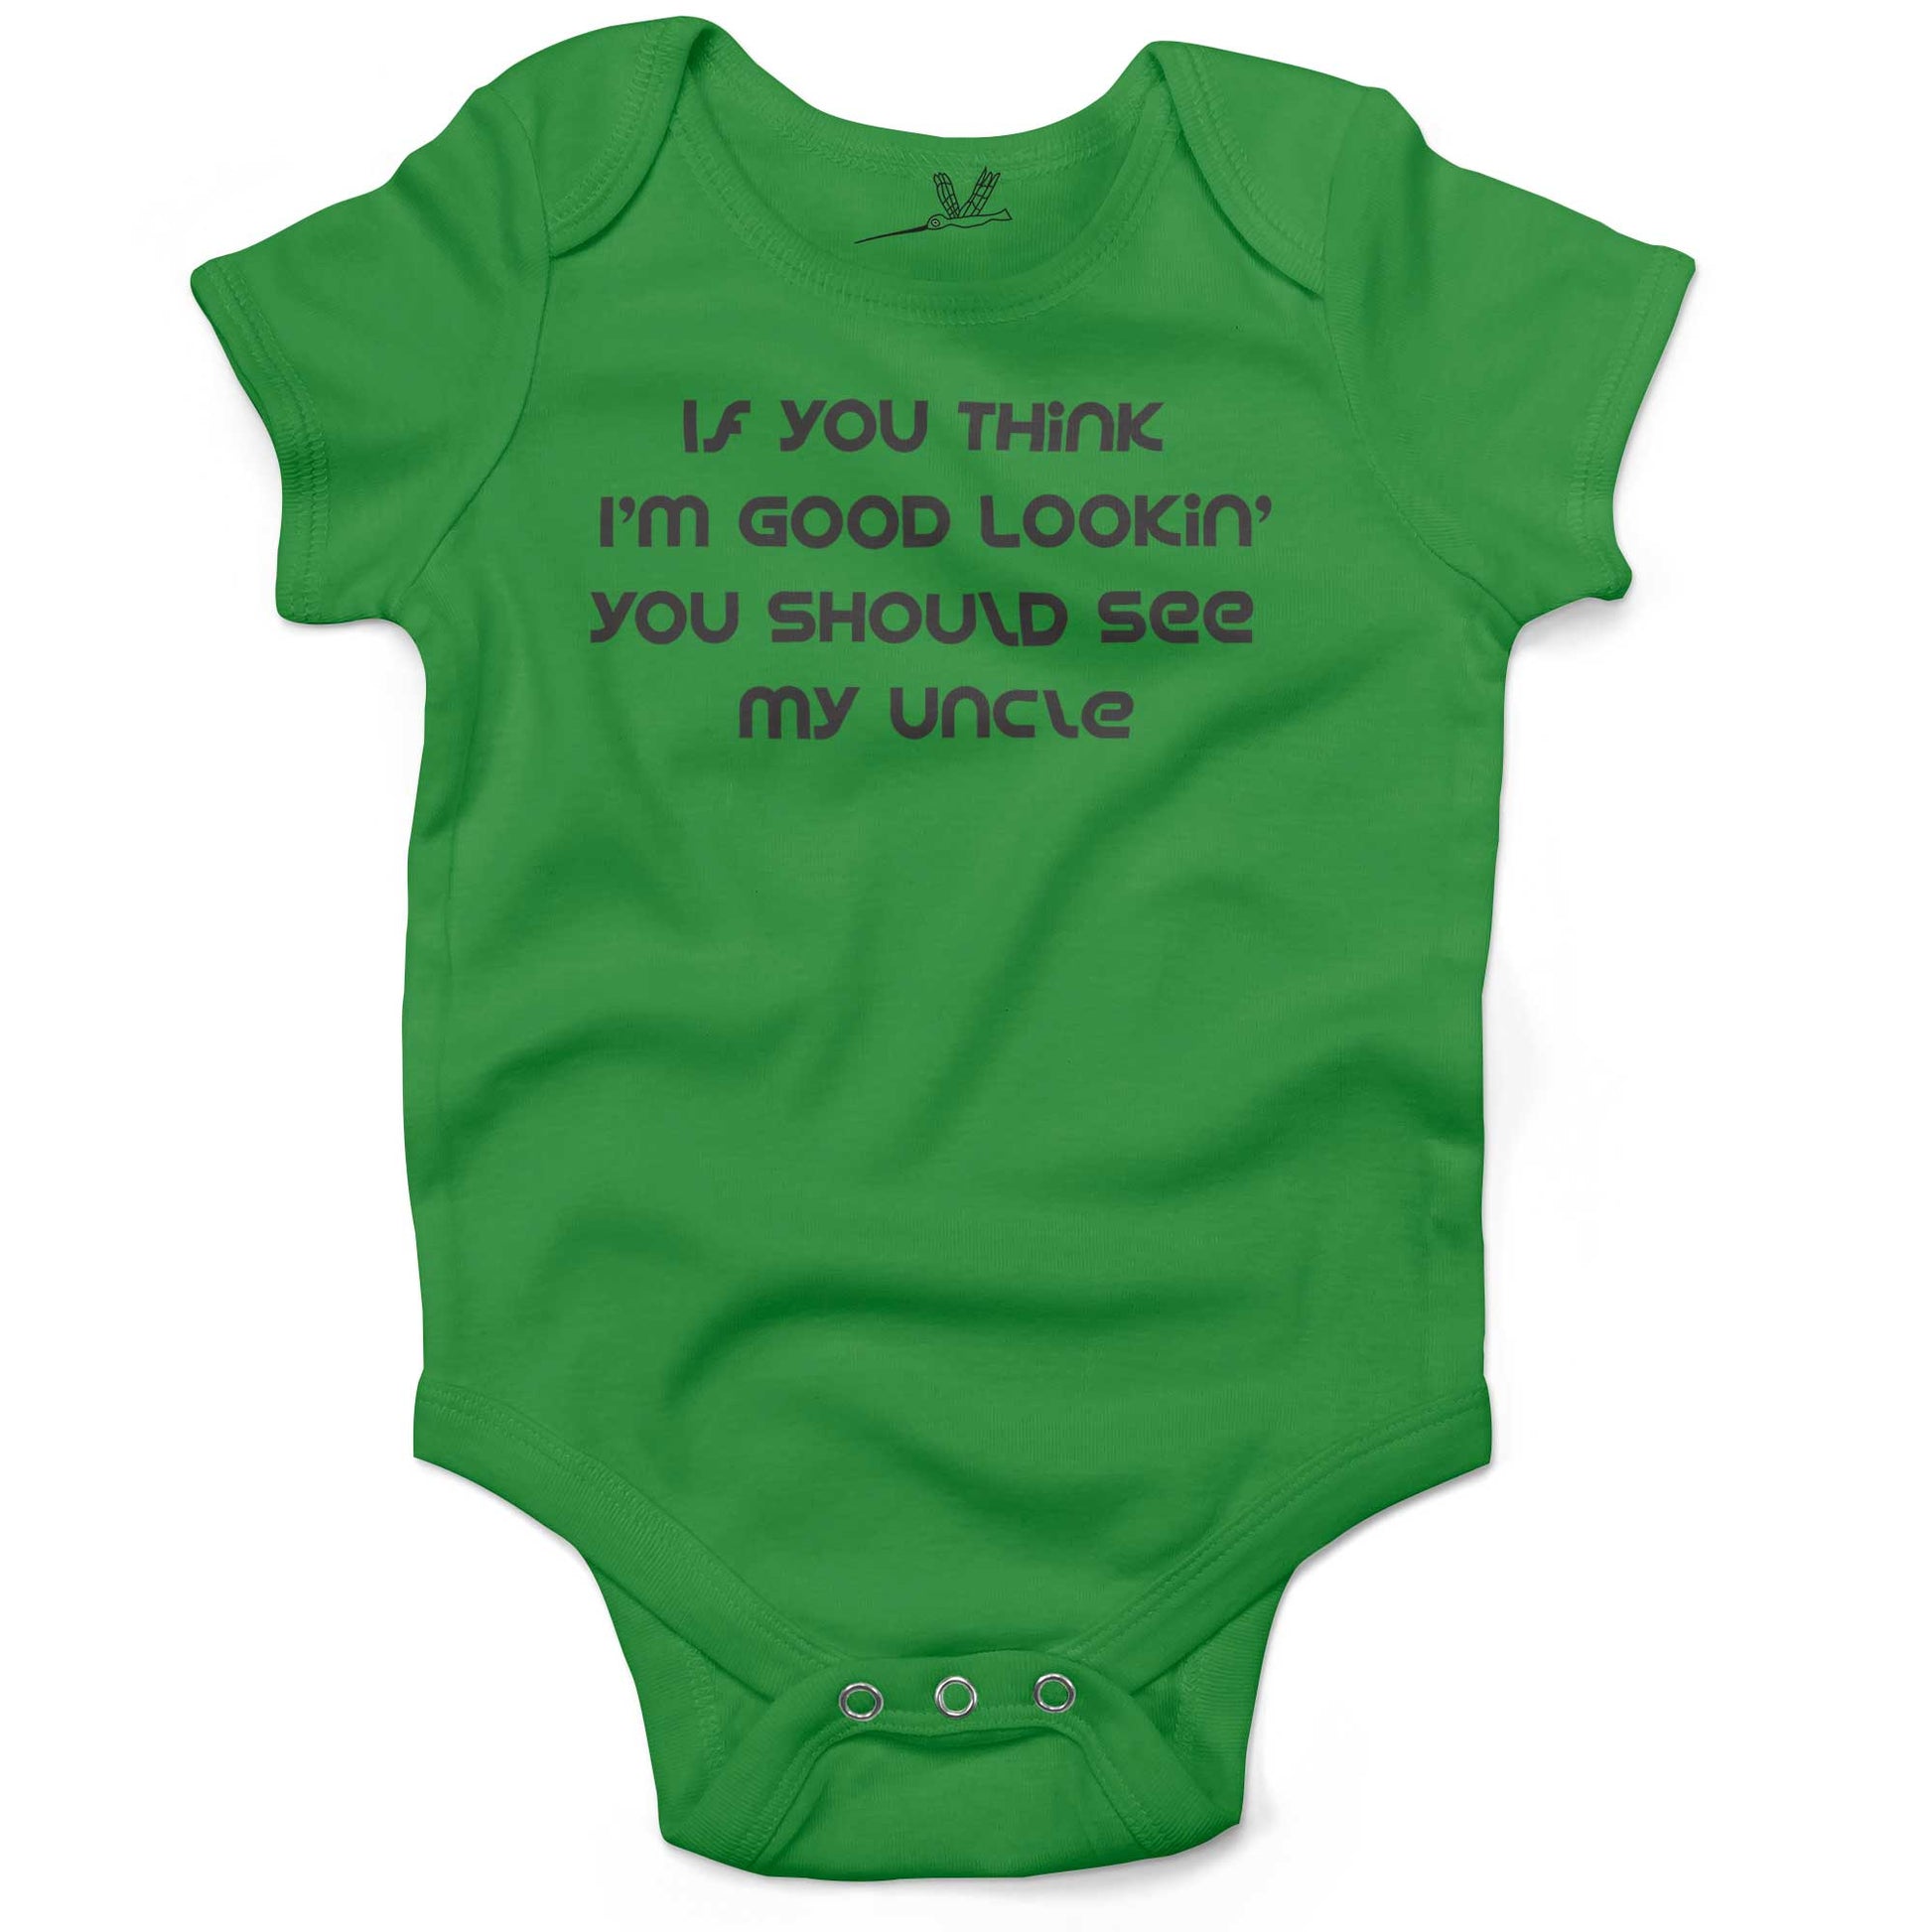 If You Think I'm Good Lookin' You Should See My Uncle Infant Bodysuit or Raglan Tee-Grass Green-3-6 months